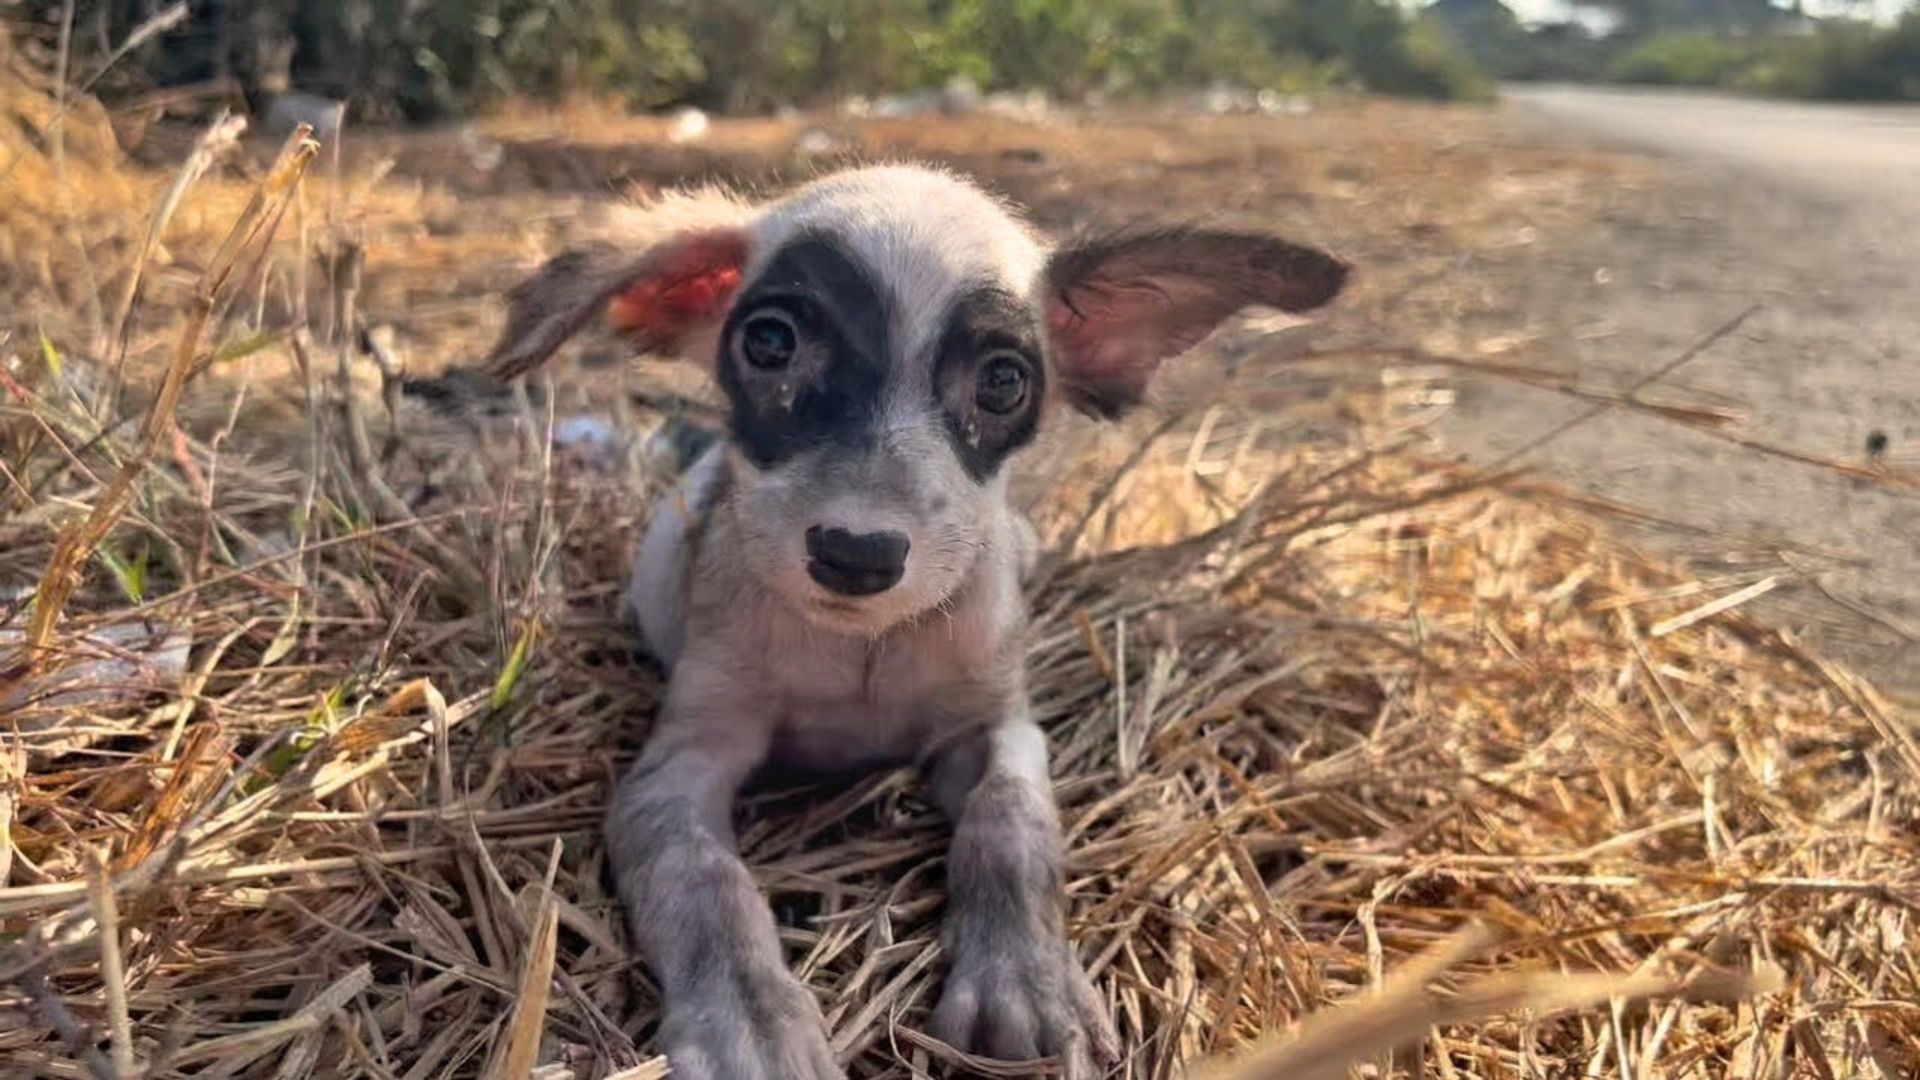 A Kind Man Comes Across A Sweet Stray Puppy And Gives Her A Forever Home